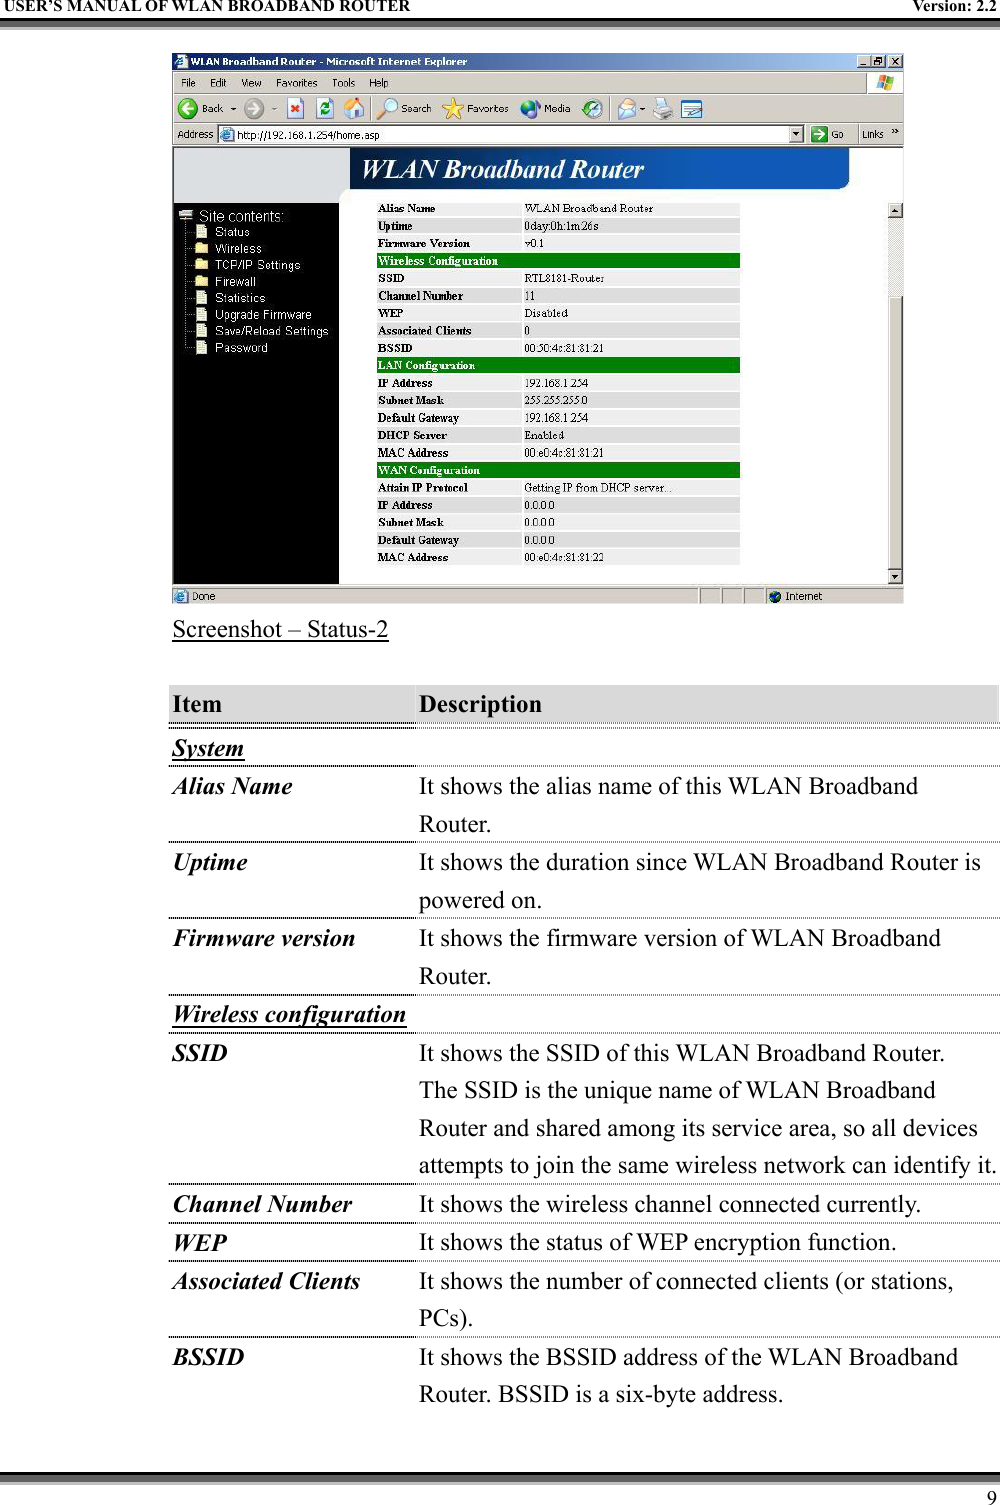   USER’S MANUAL OF WLAN BROADBAND ROUTER    Version: 2.2     9  Screenshot – Status-2  Item  Description   System  Alias Name It shows the alias name of this WLAN Broadband Router. Uptime It shows the duration since WLAN Broadband Router is powered on.   Firmware version It shows the firmware version of WLAN Broadband Router. Wireless configuration  SSID It shows the SSID of this WLAN Broadband Router. The SSID is the unique name of WLAN Broadband Router and shared among its service area, so all devices attempts to join the same wireless network can identify it.Channel Number It shows the wireless channel connected currently. WEP It shows the status of WEP encryption function. Associated Clients It shows the number of connected clients (or stations, PCs).  BSSID It shows the BSSID address of the WLAN Broadband Router. BSSID is a six-byte address. 